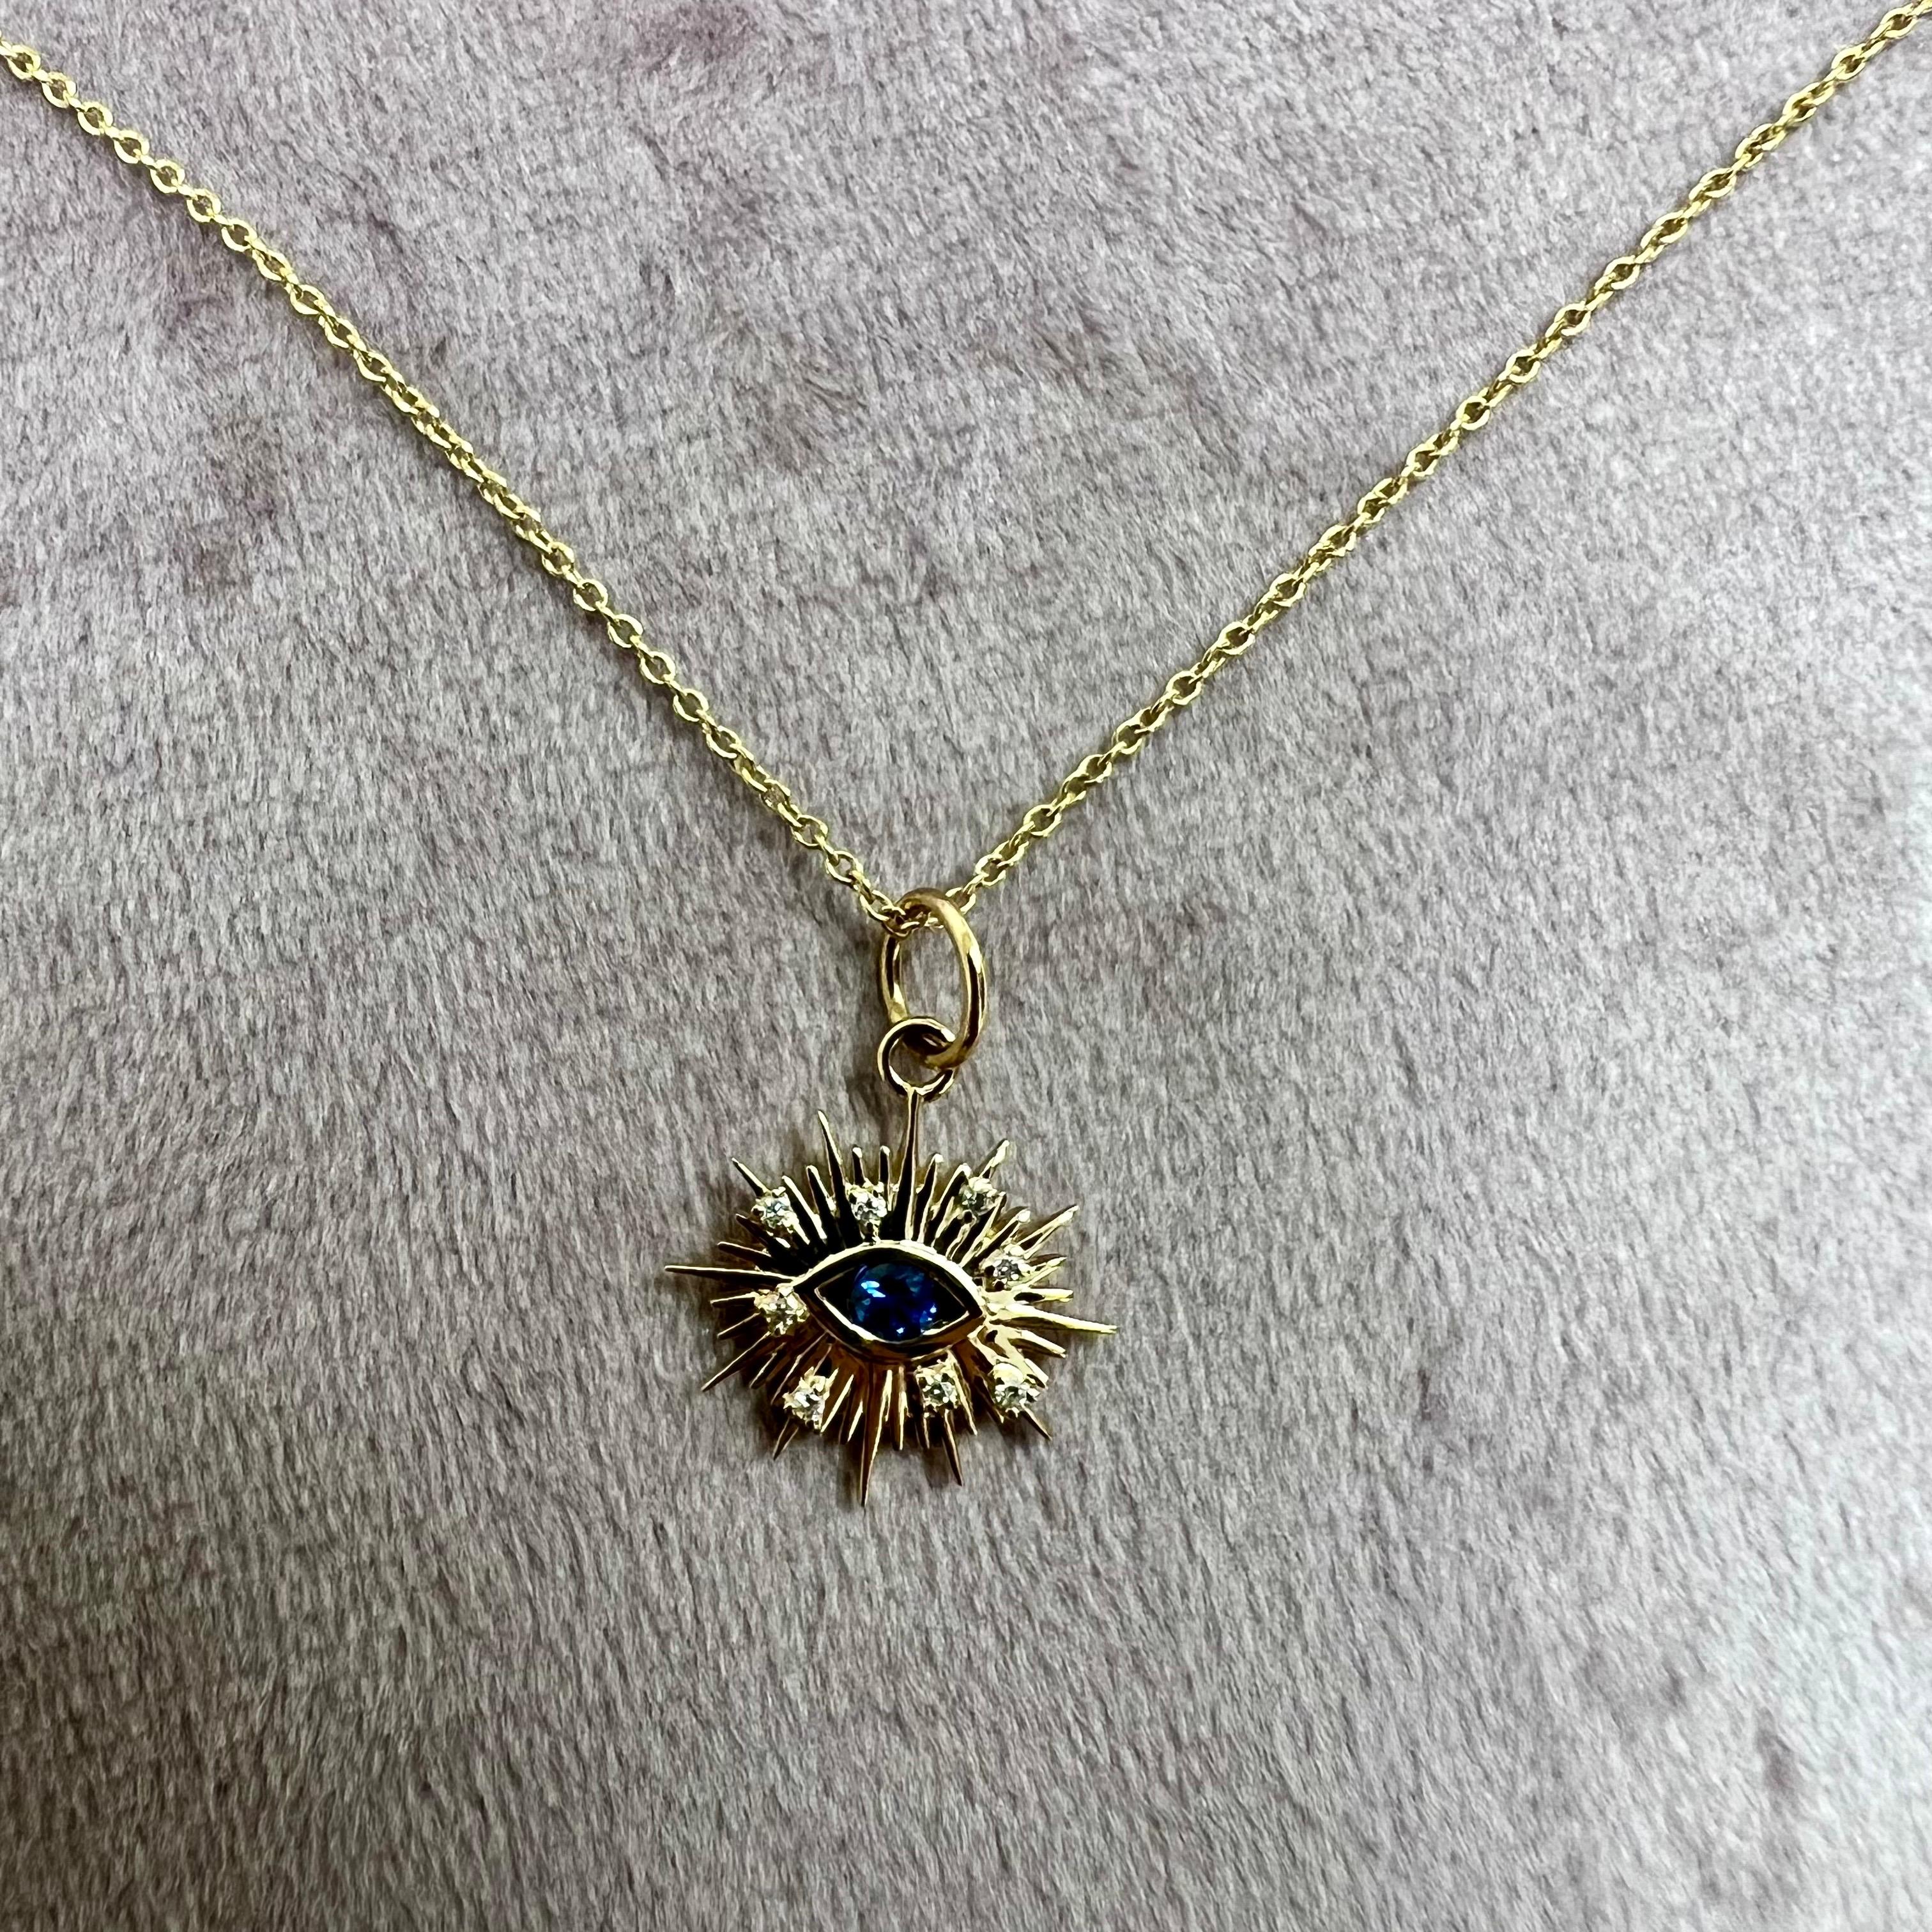 Created in 18 karat yellow gold
Blue sapphire 0.08 carat approx.
Diamonds 0.03 carat approx.
Chain sold separately 

Constructed from 18-karat yellow gold, this pendant is adorned with a blue sapphire of approximately 0.08 carat, sparkling diamonds